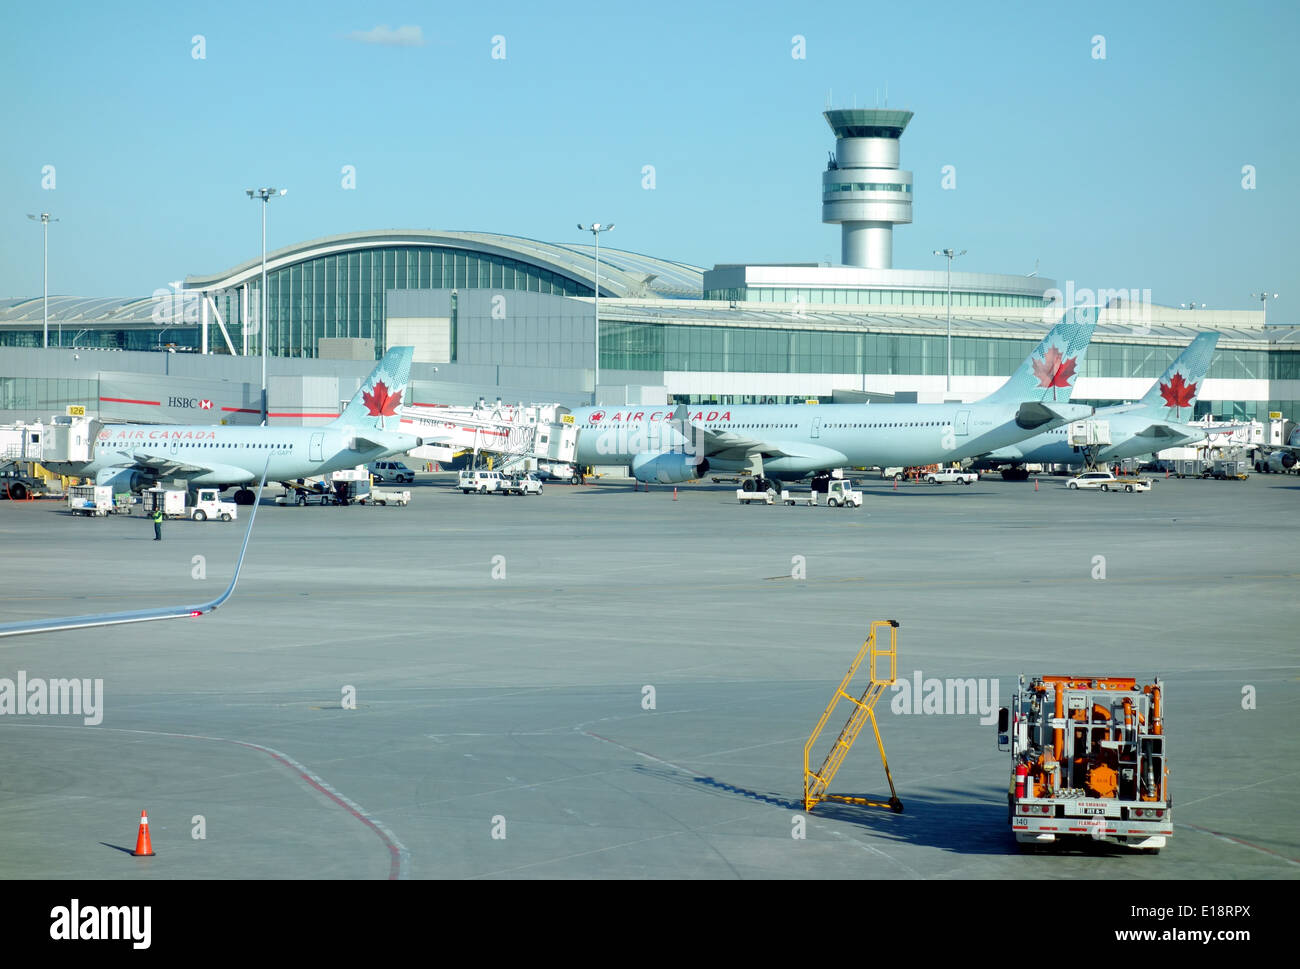 Air Canada planes at the Pearson Toronto Airport Stock Photo